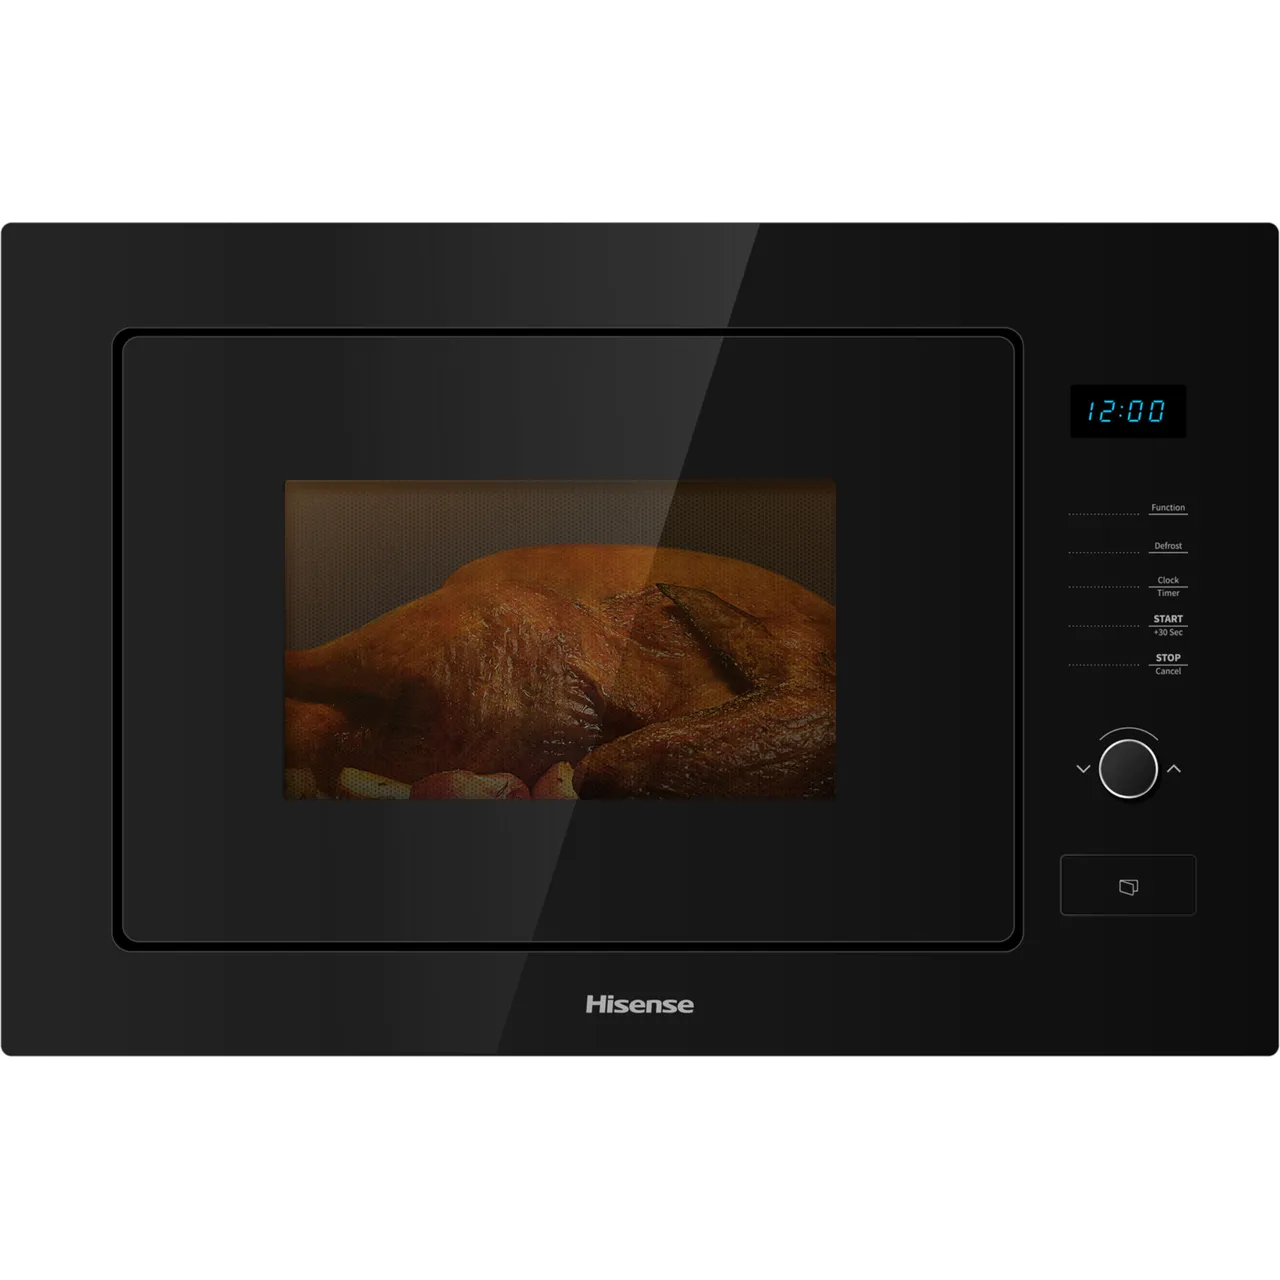 Hisense HB25MOBX7GUK 39cm High, Built In Small Microwave - Black (EX-DISPLAY/A)